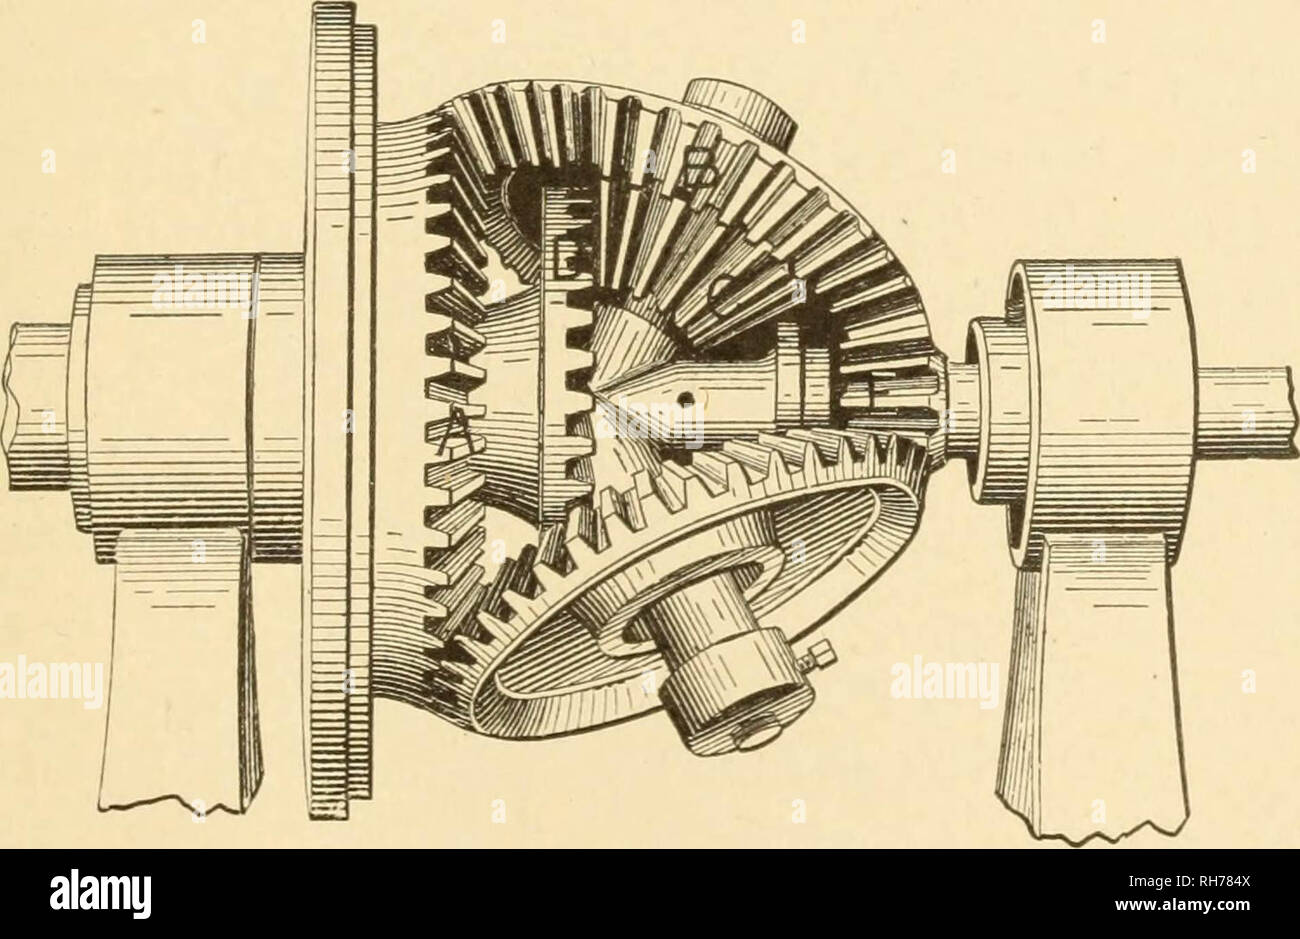 Mechanical movements, powers and devices; a treatise describing mechanical movements and devices used in constructive and operative machinery and the mechanical arts, being practically a mechanical dictionary, commencing with a rudimentary description of the early known mechanical powers and detailing the various motions, appliances and inventions used in the mechanical arts to the present time, including a chapter on straight line movements, by Gardner D. Hiscox Stock Photo